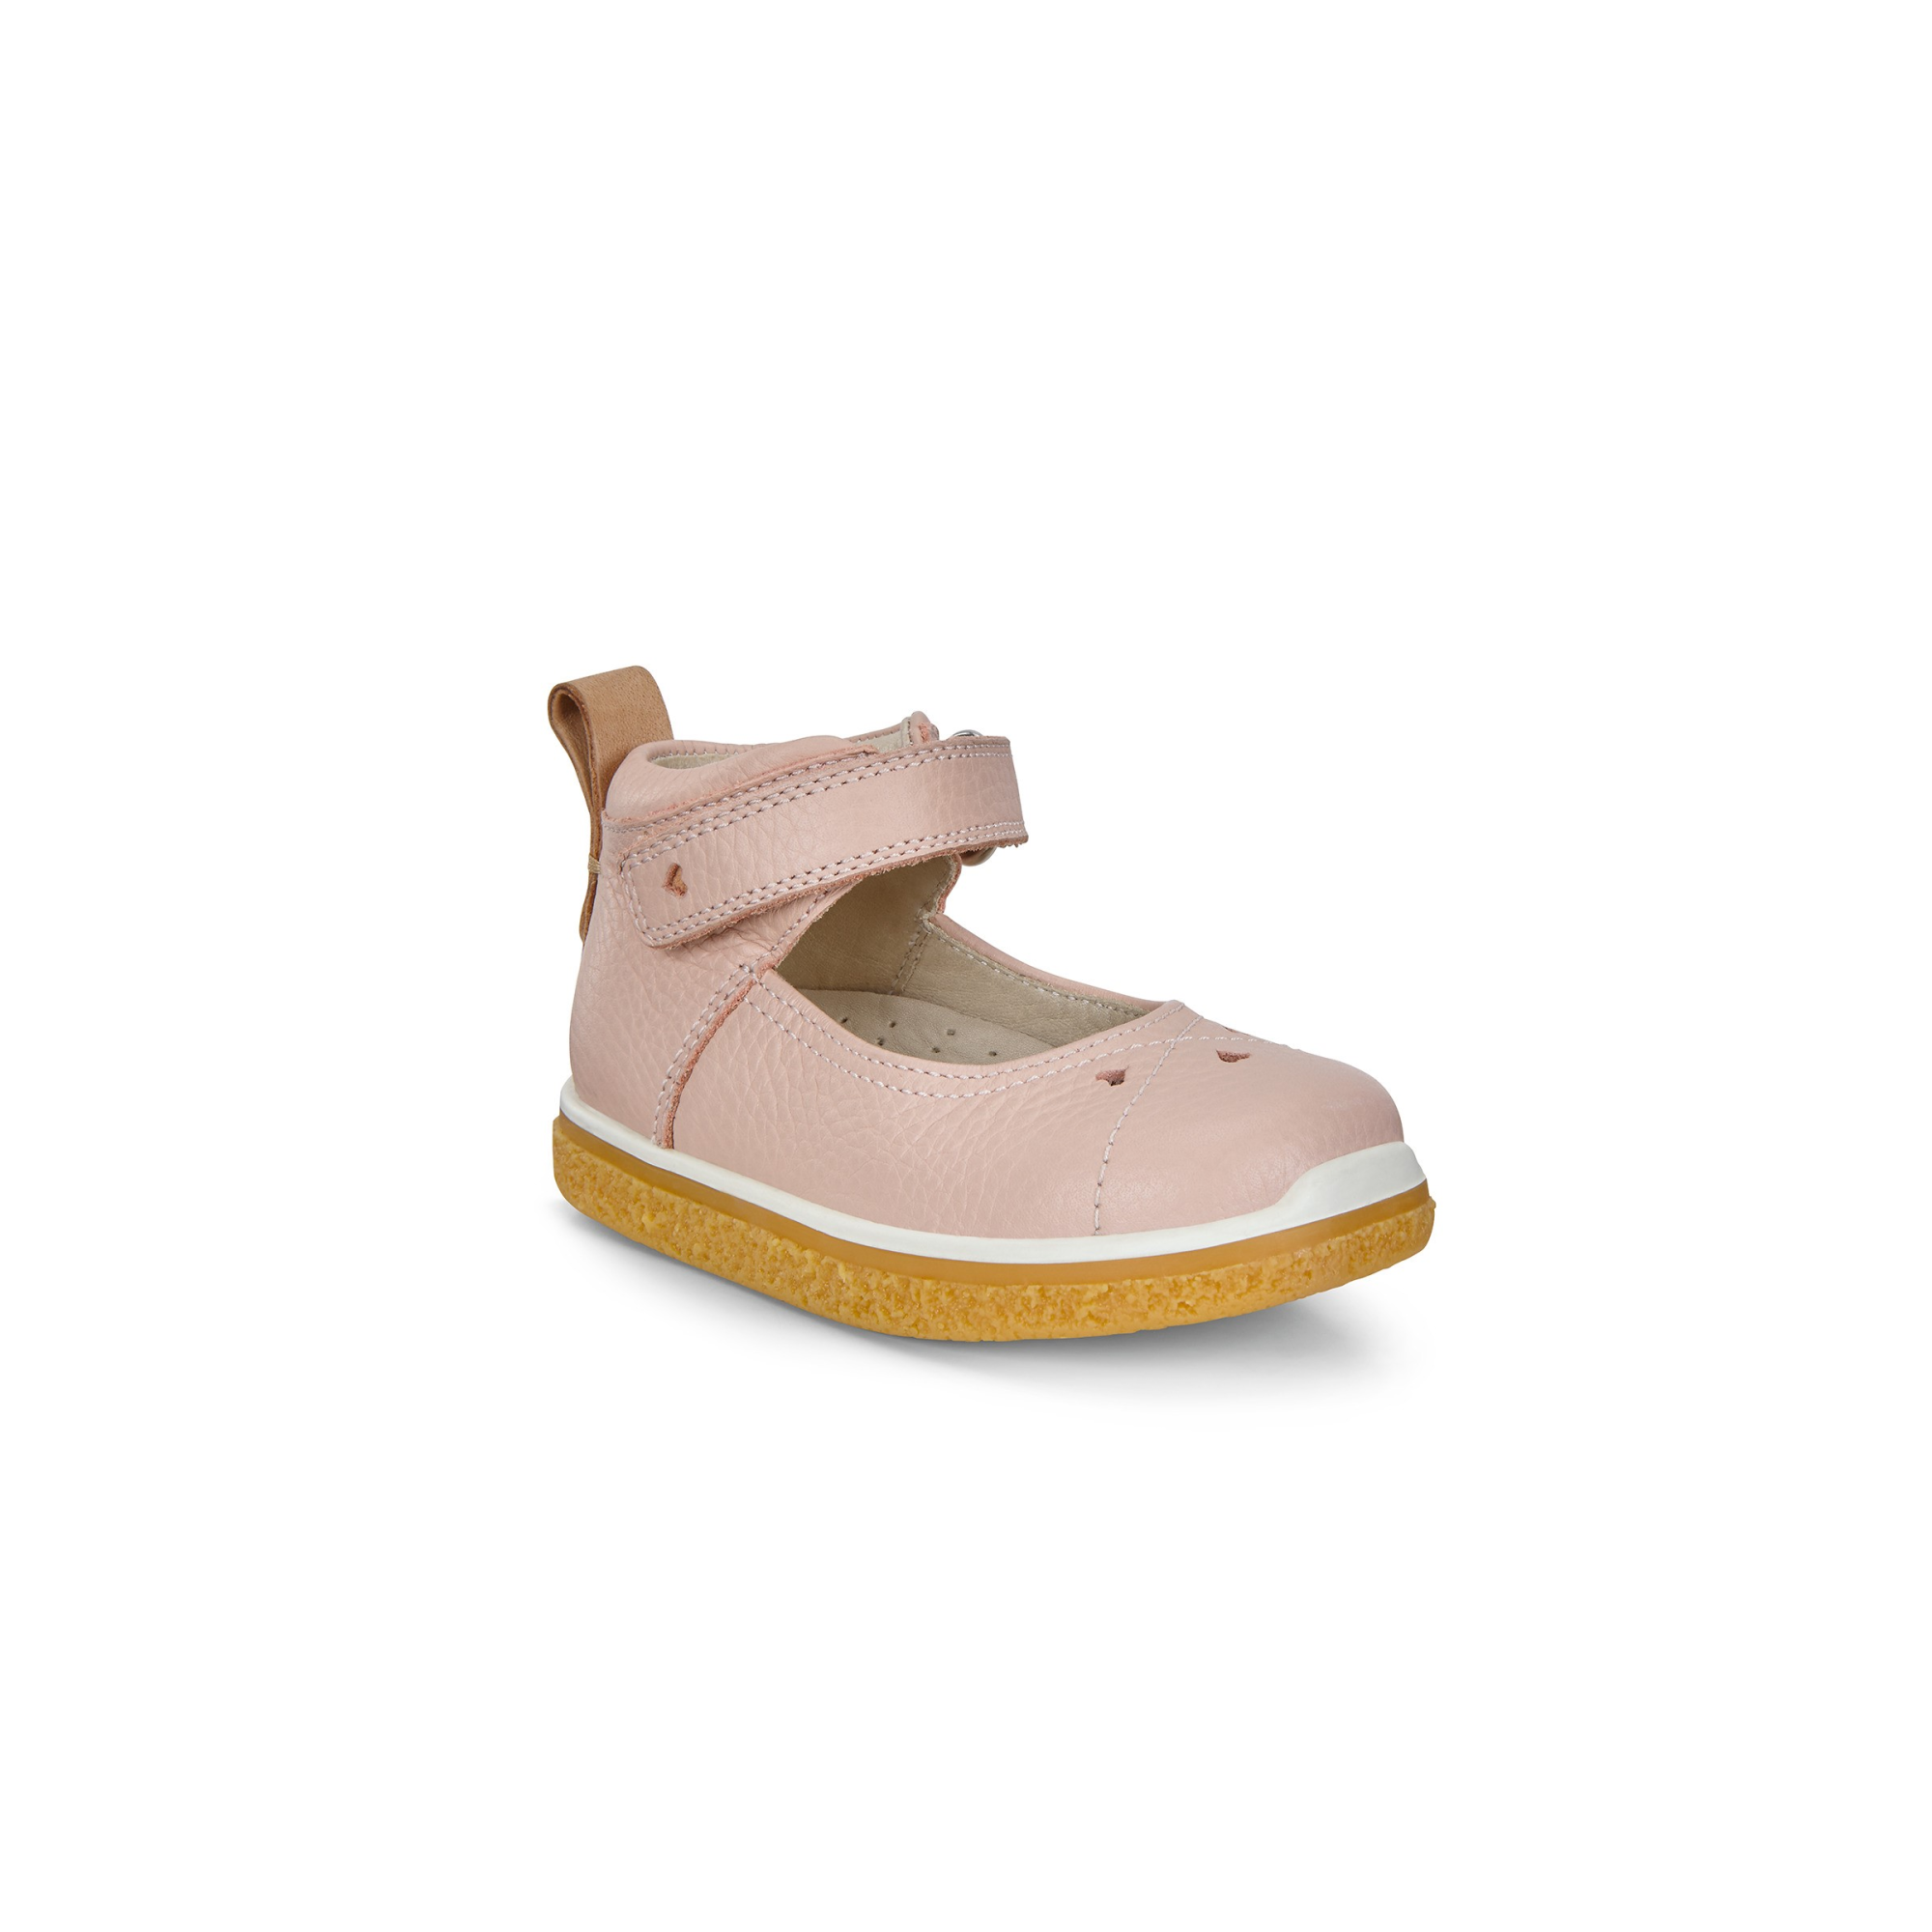 Ecco CREPETRAY MINI Mary Jane 19 - Products - Veryk Mall - Veryk many quick response, safe your